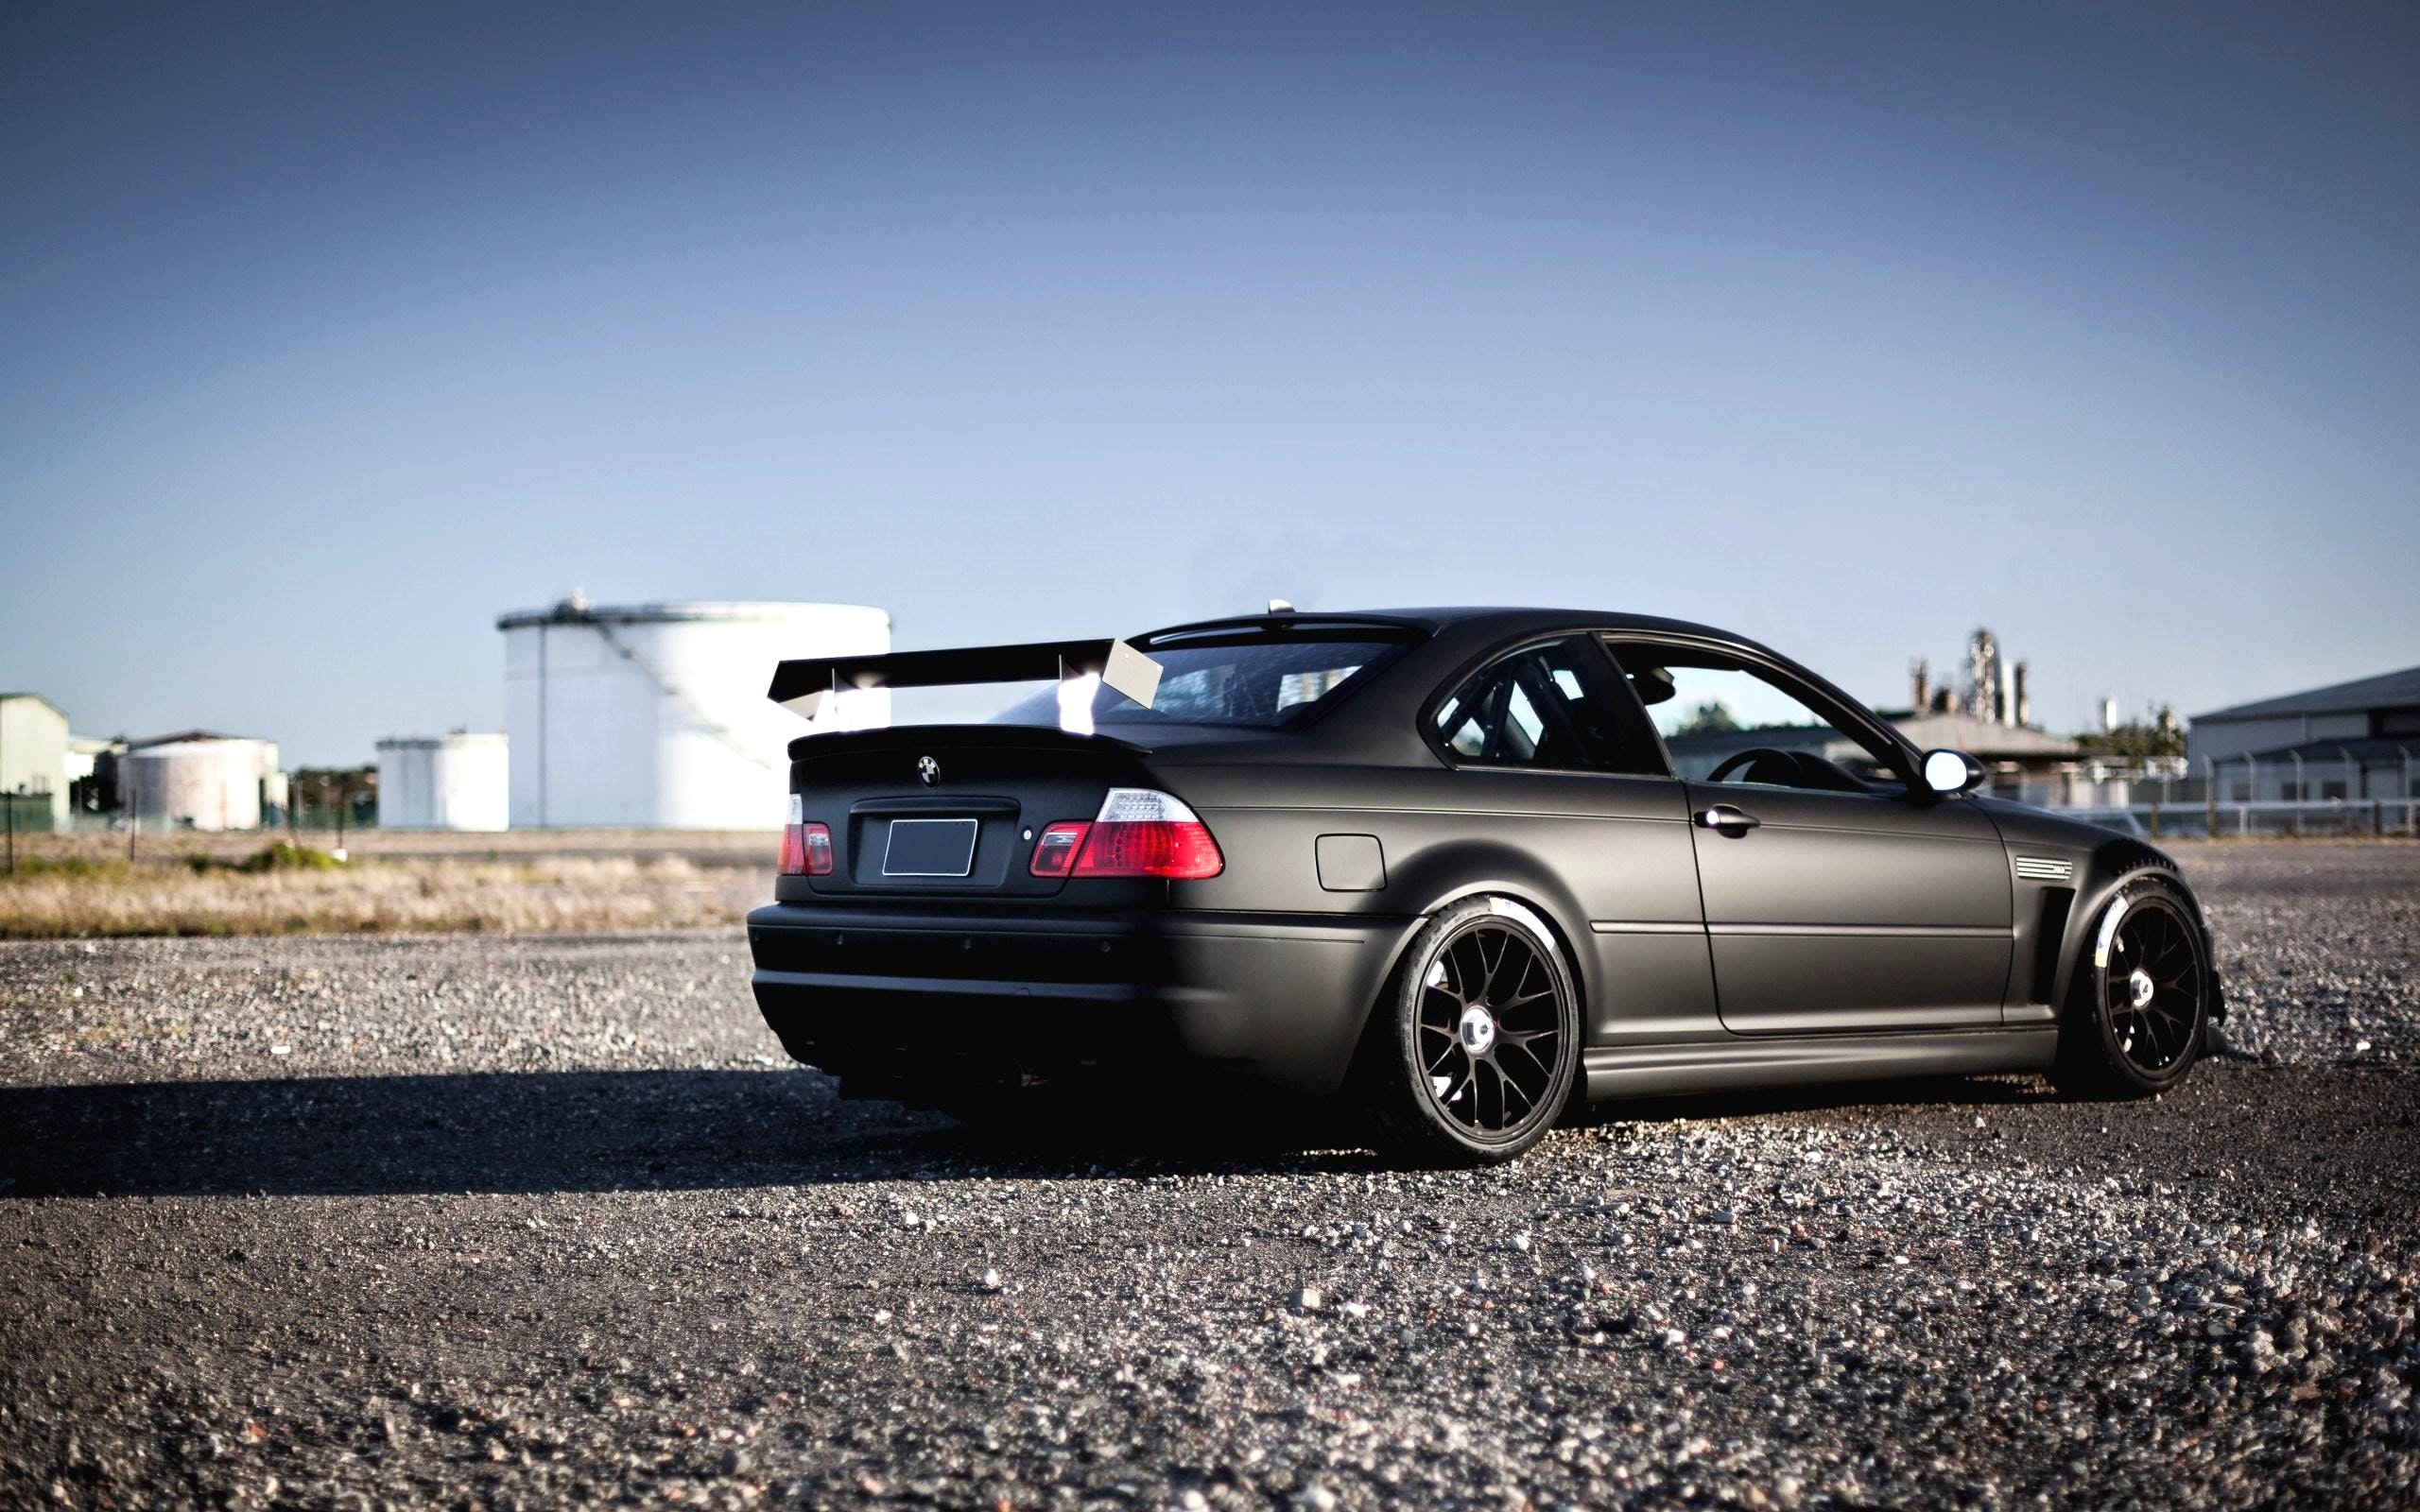 2560x1600 Bmw E46 Tuning Con Tag For M3 Wallpaper Nano Trunk Und Car Exclusive  Wallpapers 